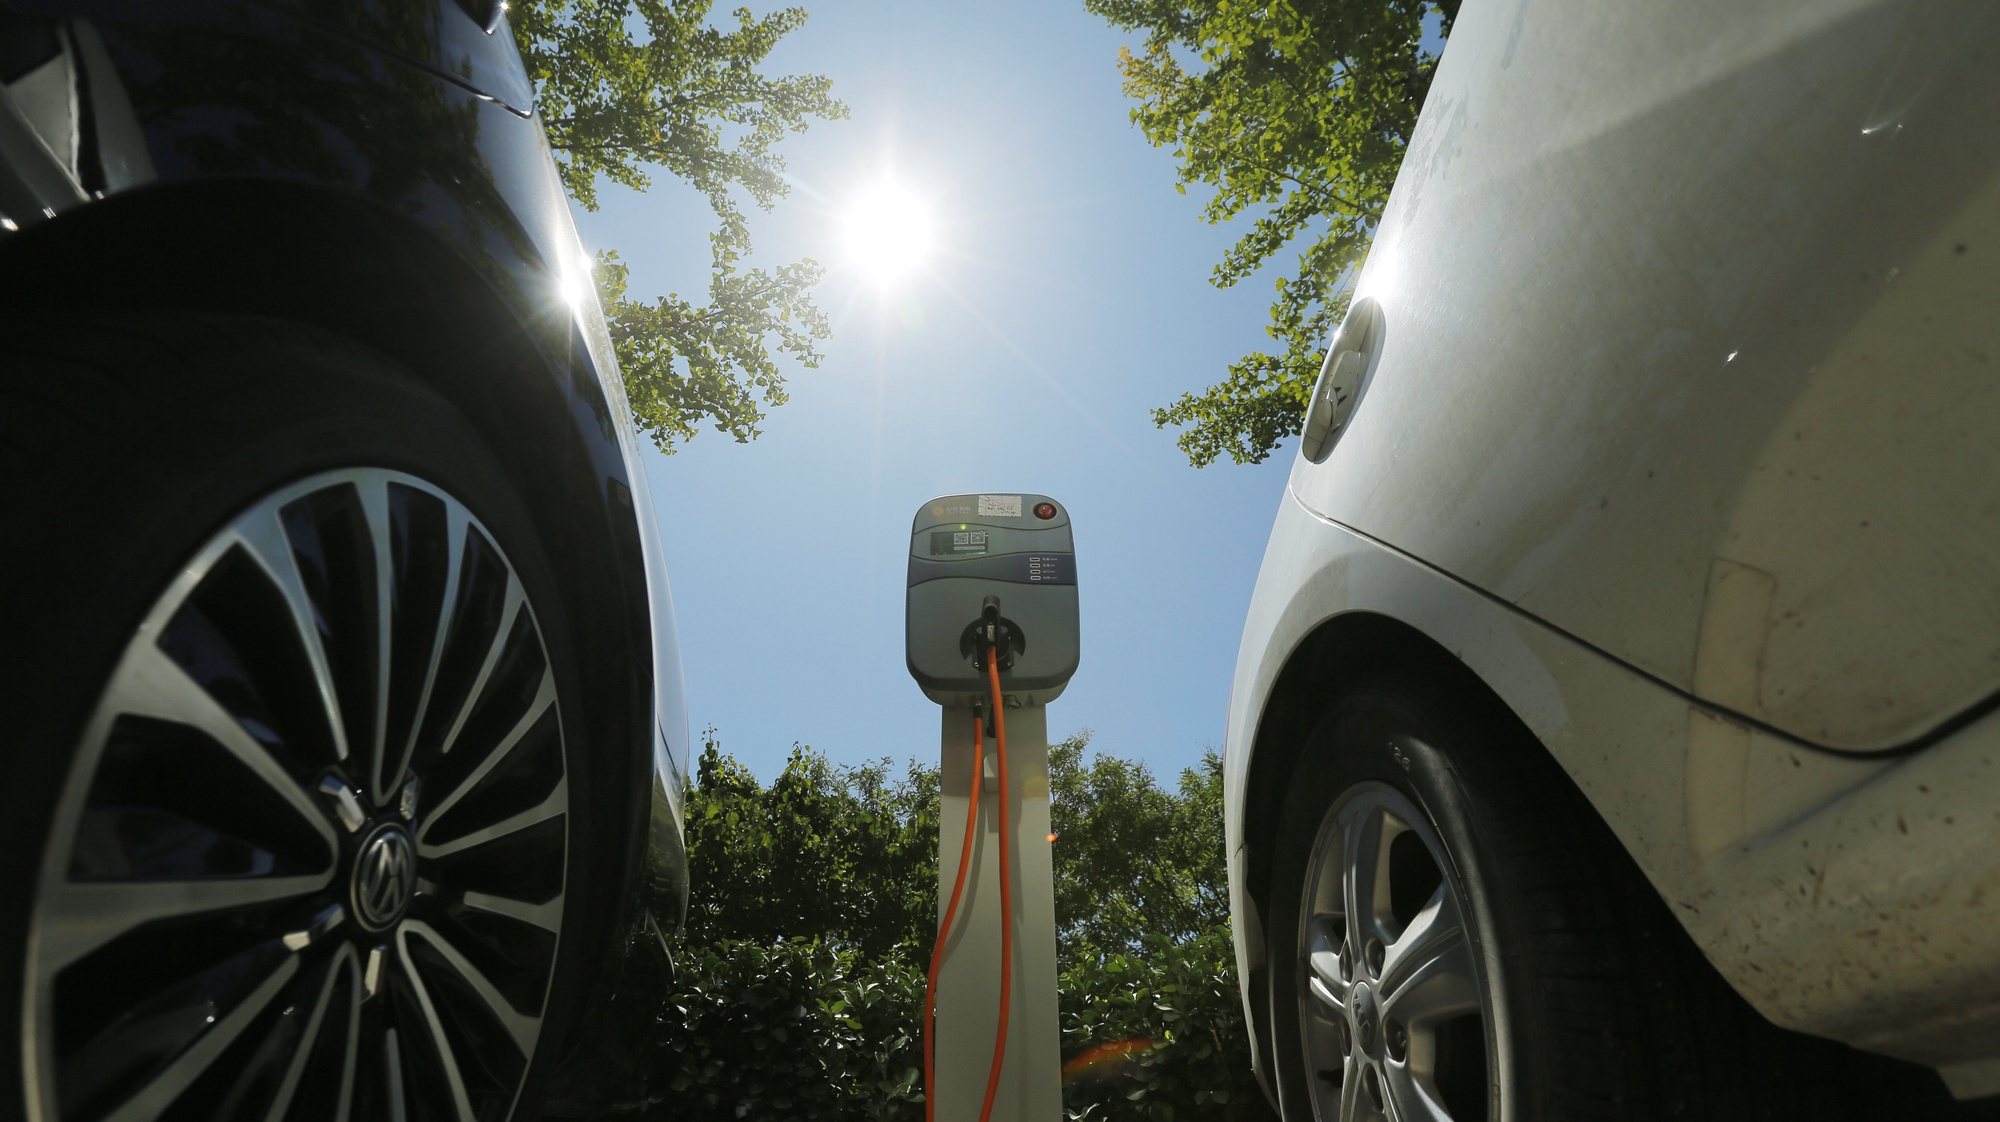 epa06197627 A charging pole for electric vehicles is seen at an electric vehicle charging station outside an apartment in Beijing, China, 11 September 2017. China plans to ban cars powered by fossil fuels in the future, while promoting hybrids and electric vehicles, Vice-minister of Ministry of Industry and Information Technology (MIIT) Xin Guobin said during a forum.  EPA/WU HONG